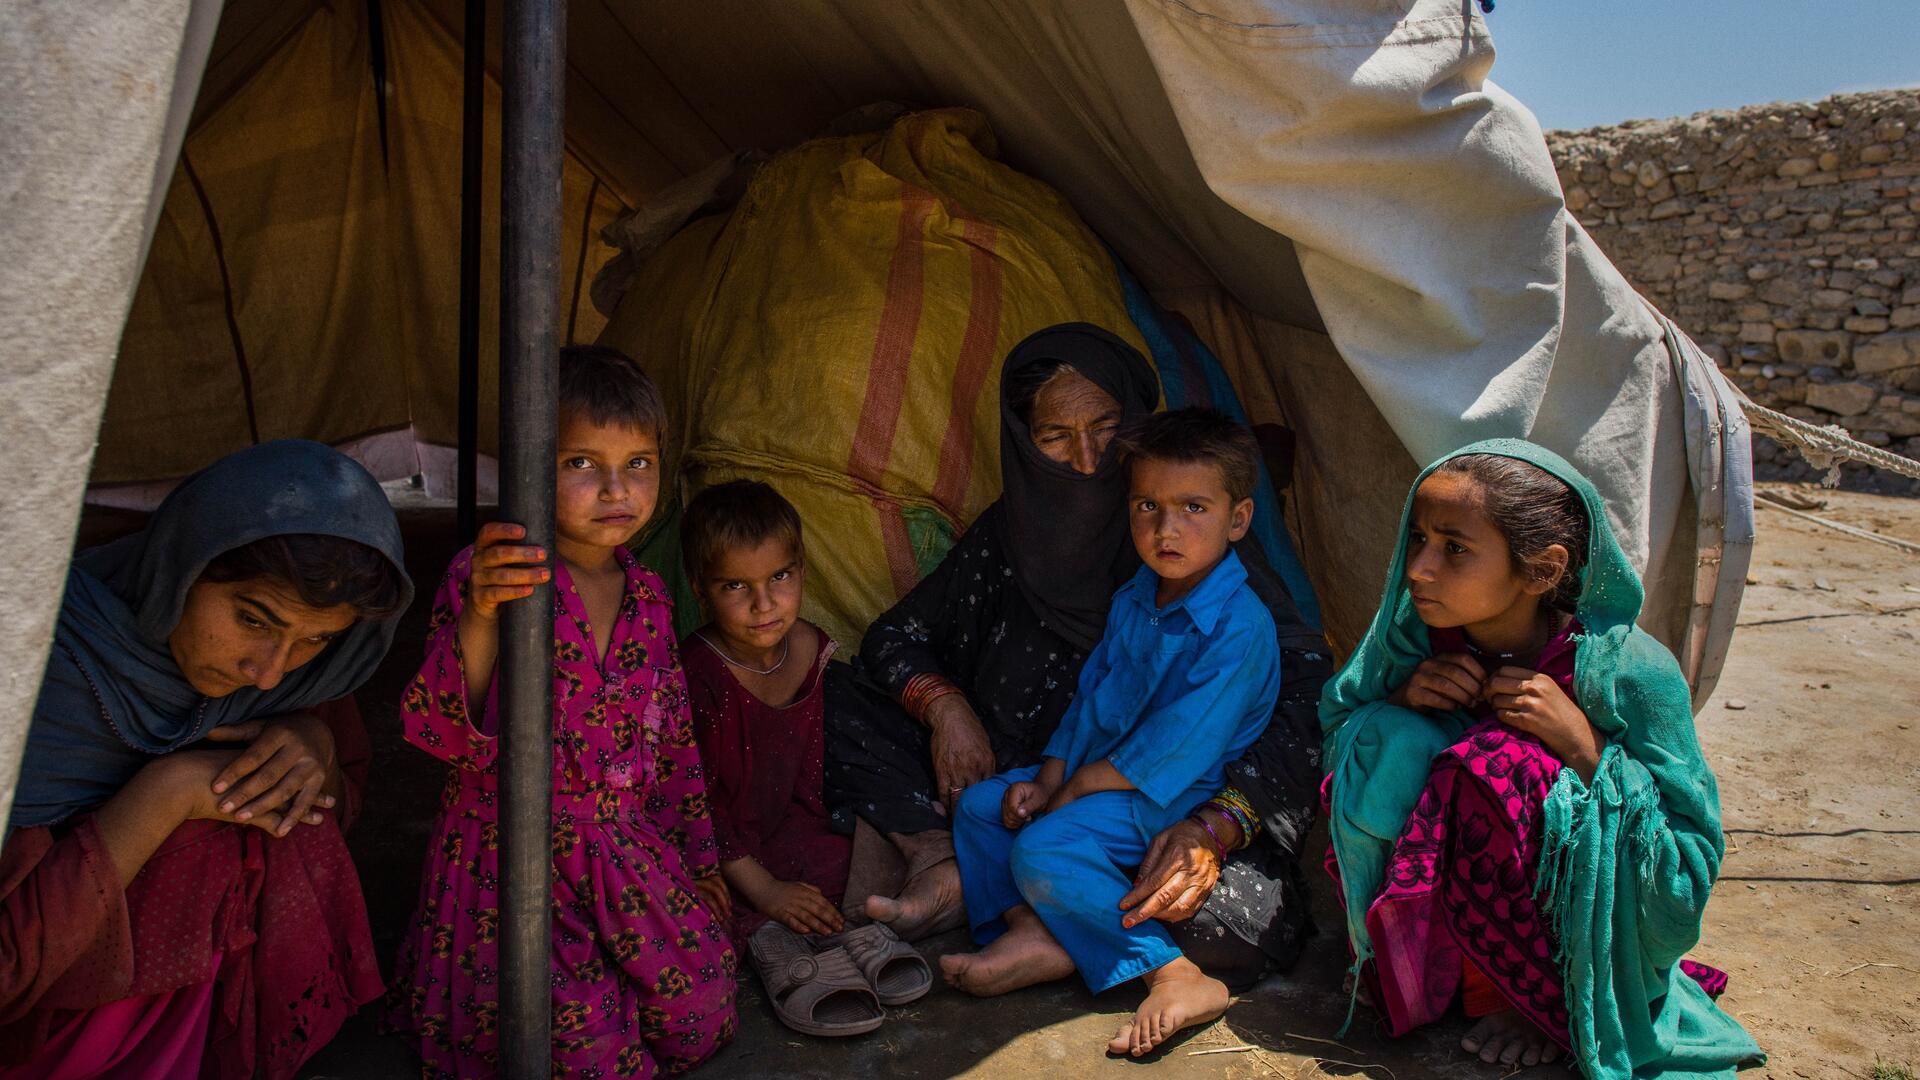 Women and children sit in the shade of one of their family's tents in a displacement camp in a desert landscape in Afghanistan..